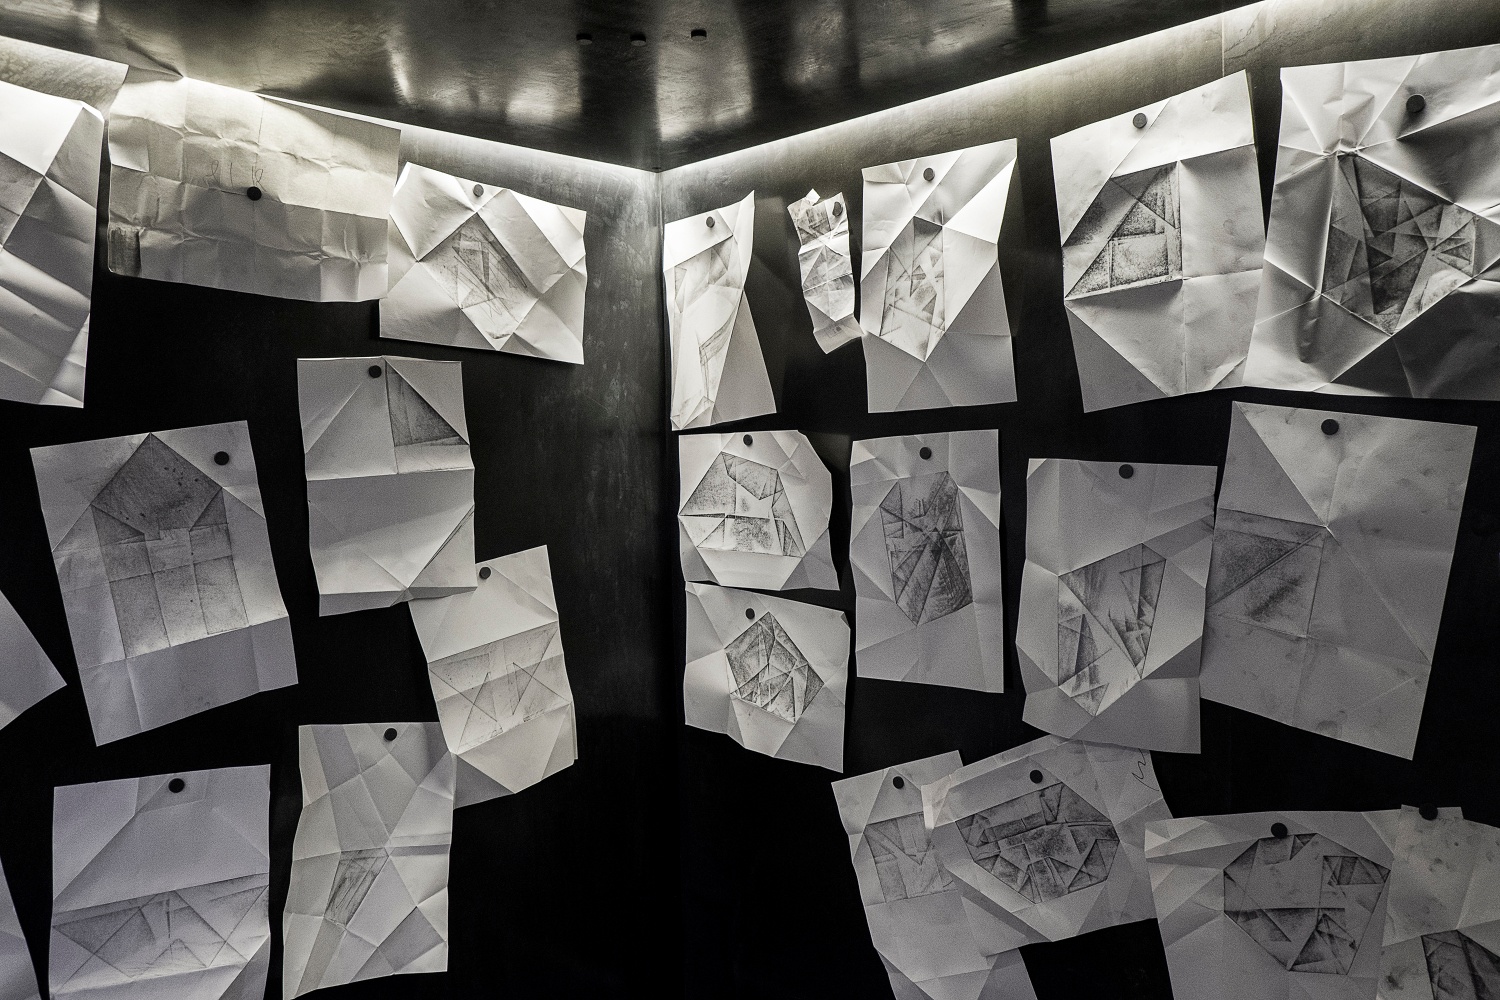 Installation photograph from the More For Less exhibition in A4’s Gallery. Graphite drawings from Christian Nerf’s participatory action ‘Teaching Teachers’ are displaued on the inside of A4’s elevator with magnets.
